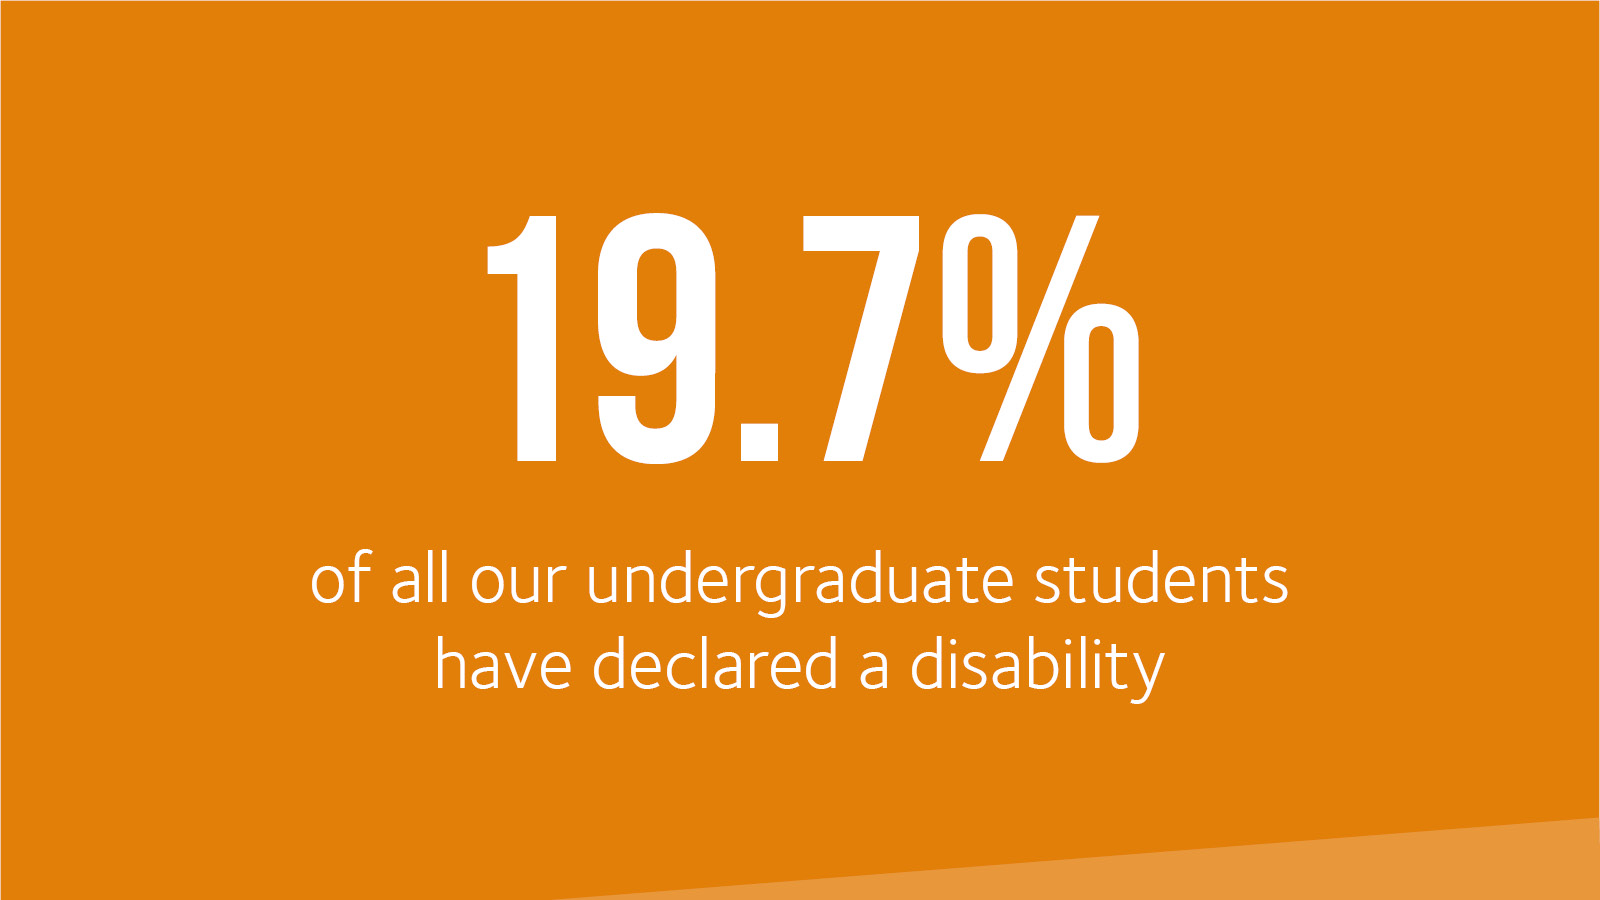 19.7% of undergraduates have declared a disability